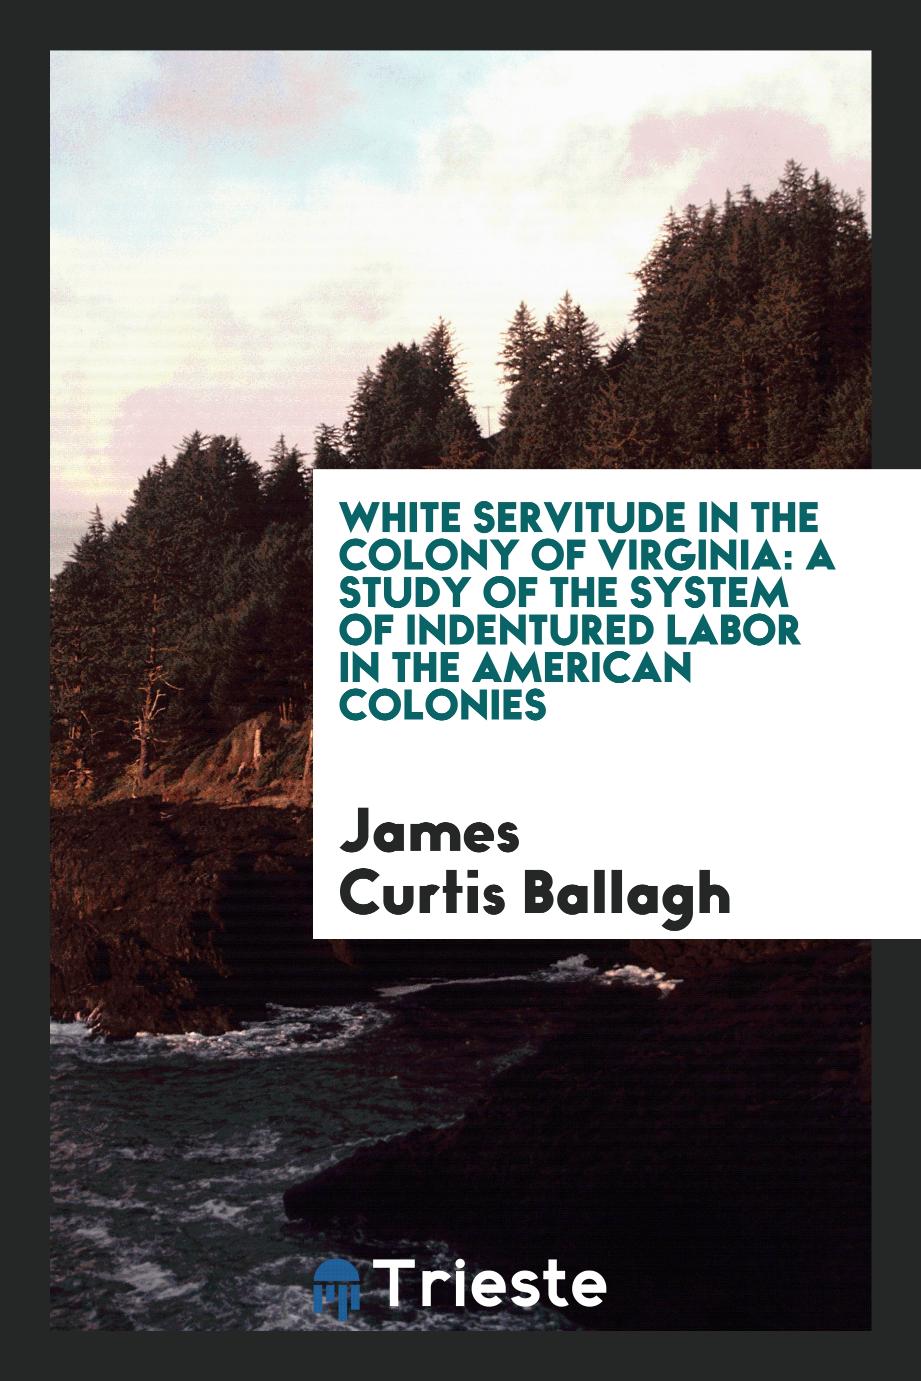 White servitude in the Colony of Virginia: a study of the system of indentured labor in the American colonies